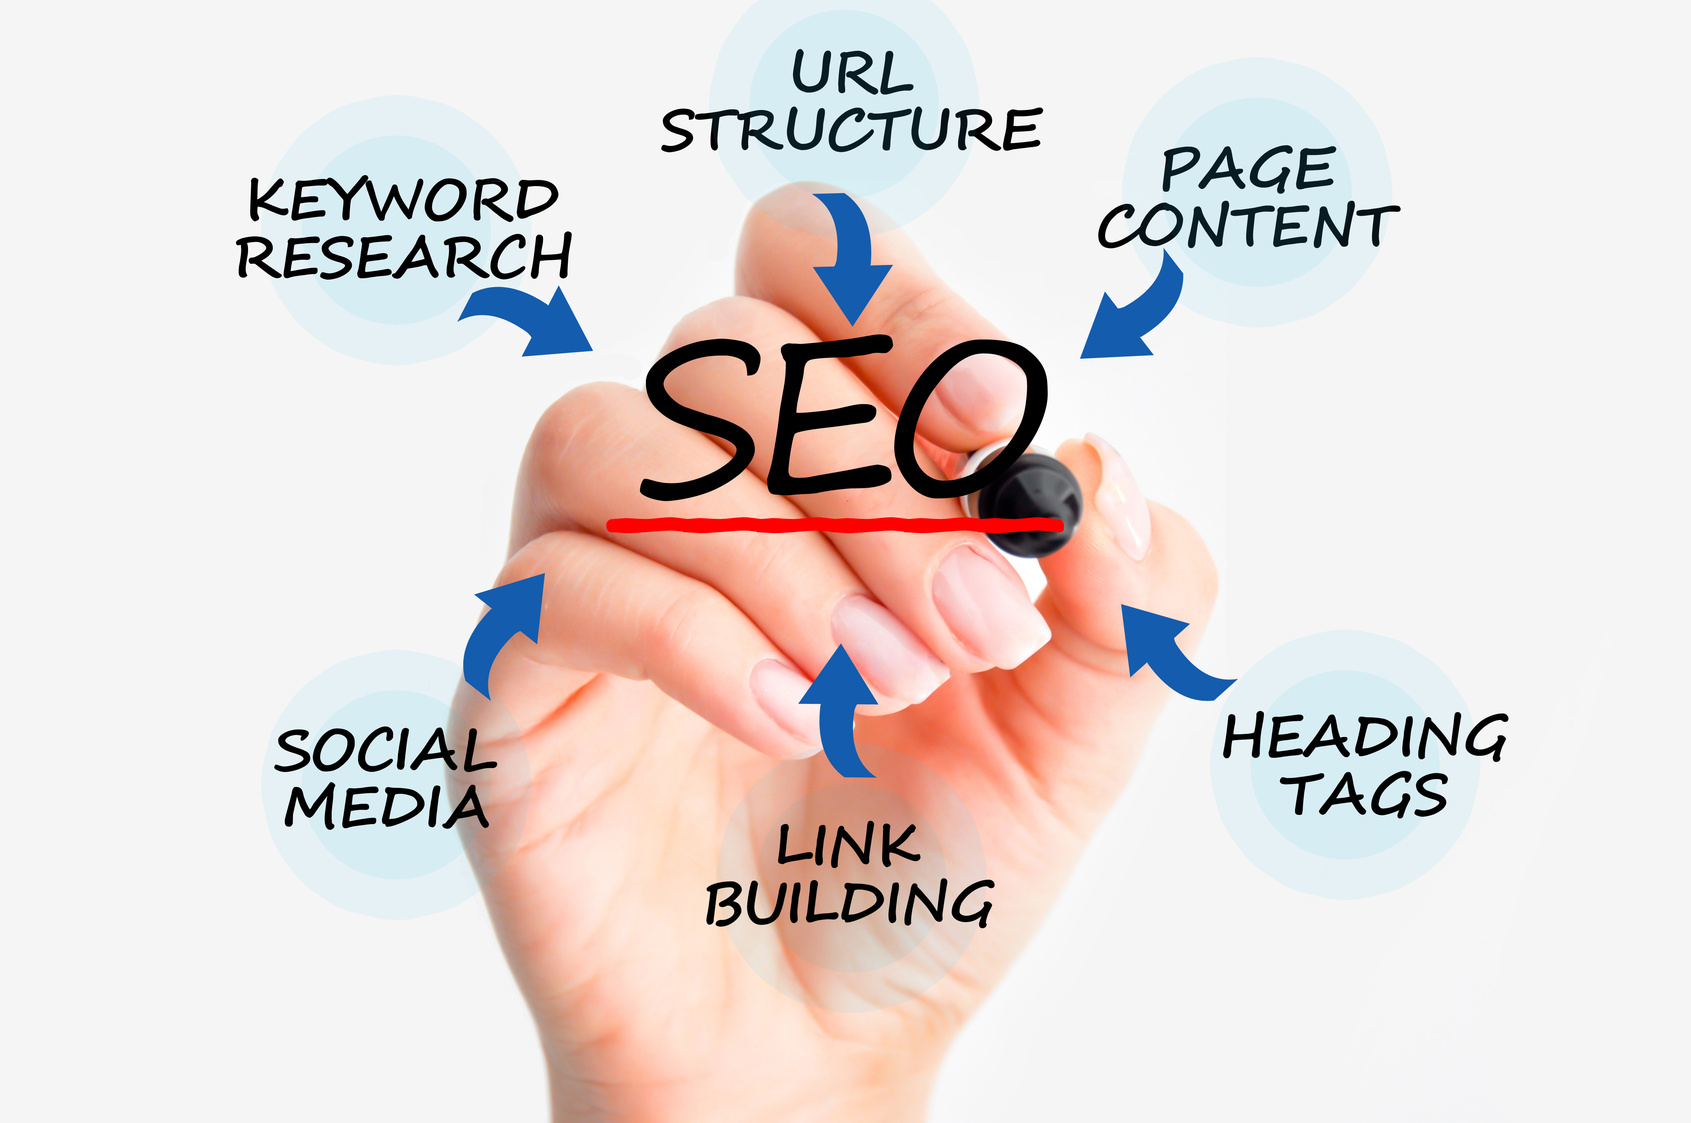 Quick Tips to Keep Up: Search Engine Optimization is Not Optional